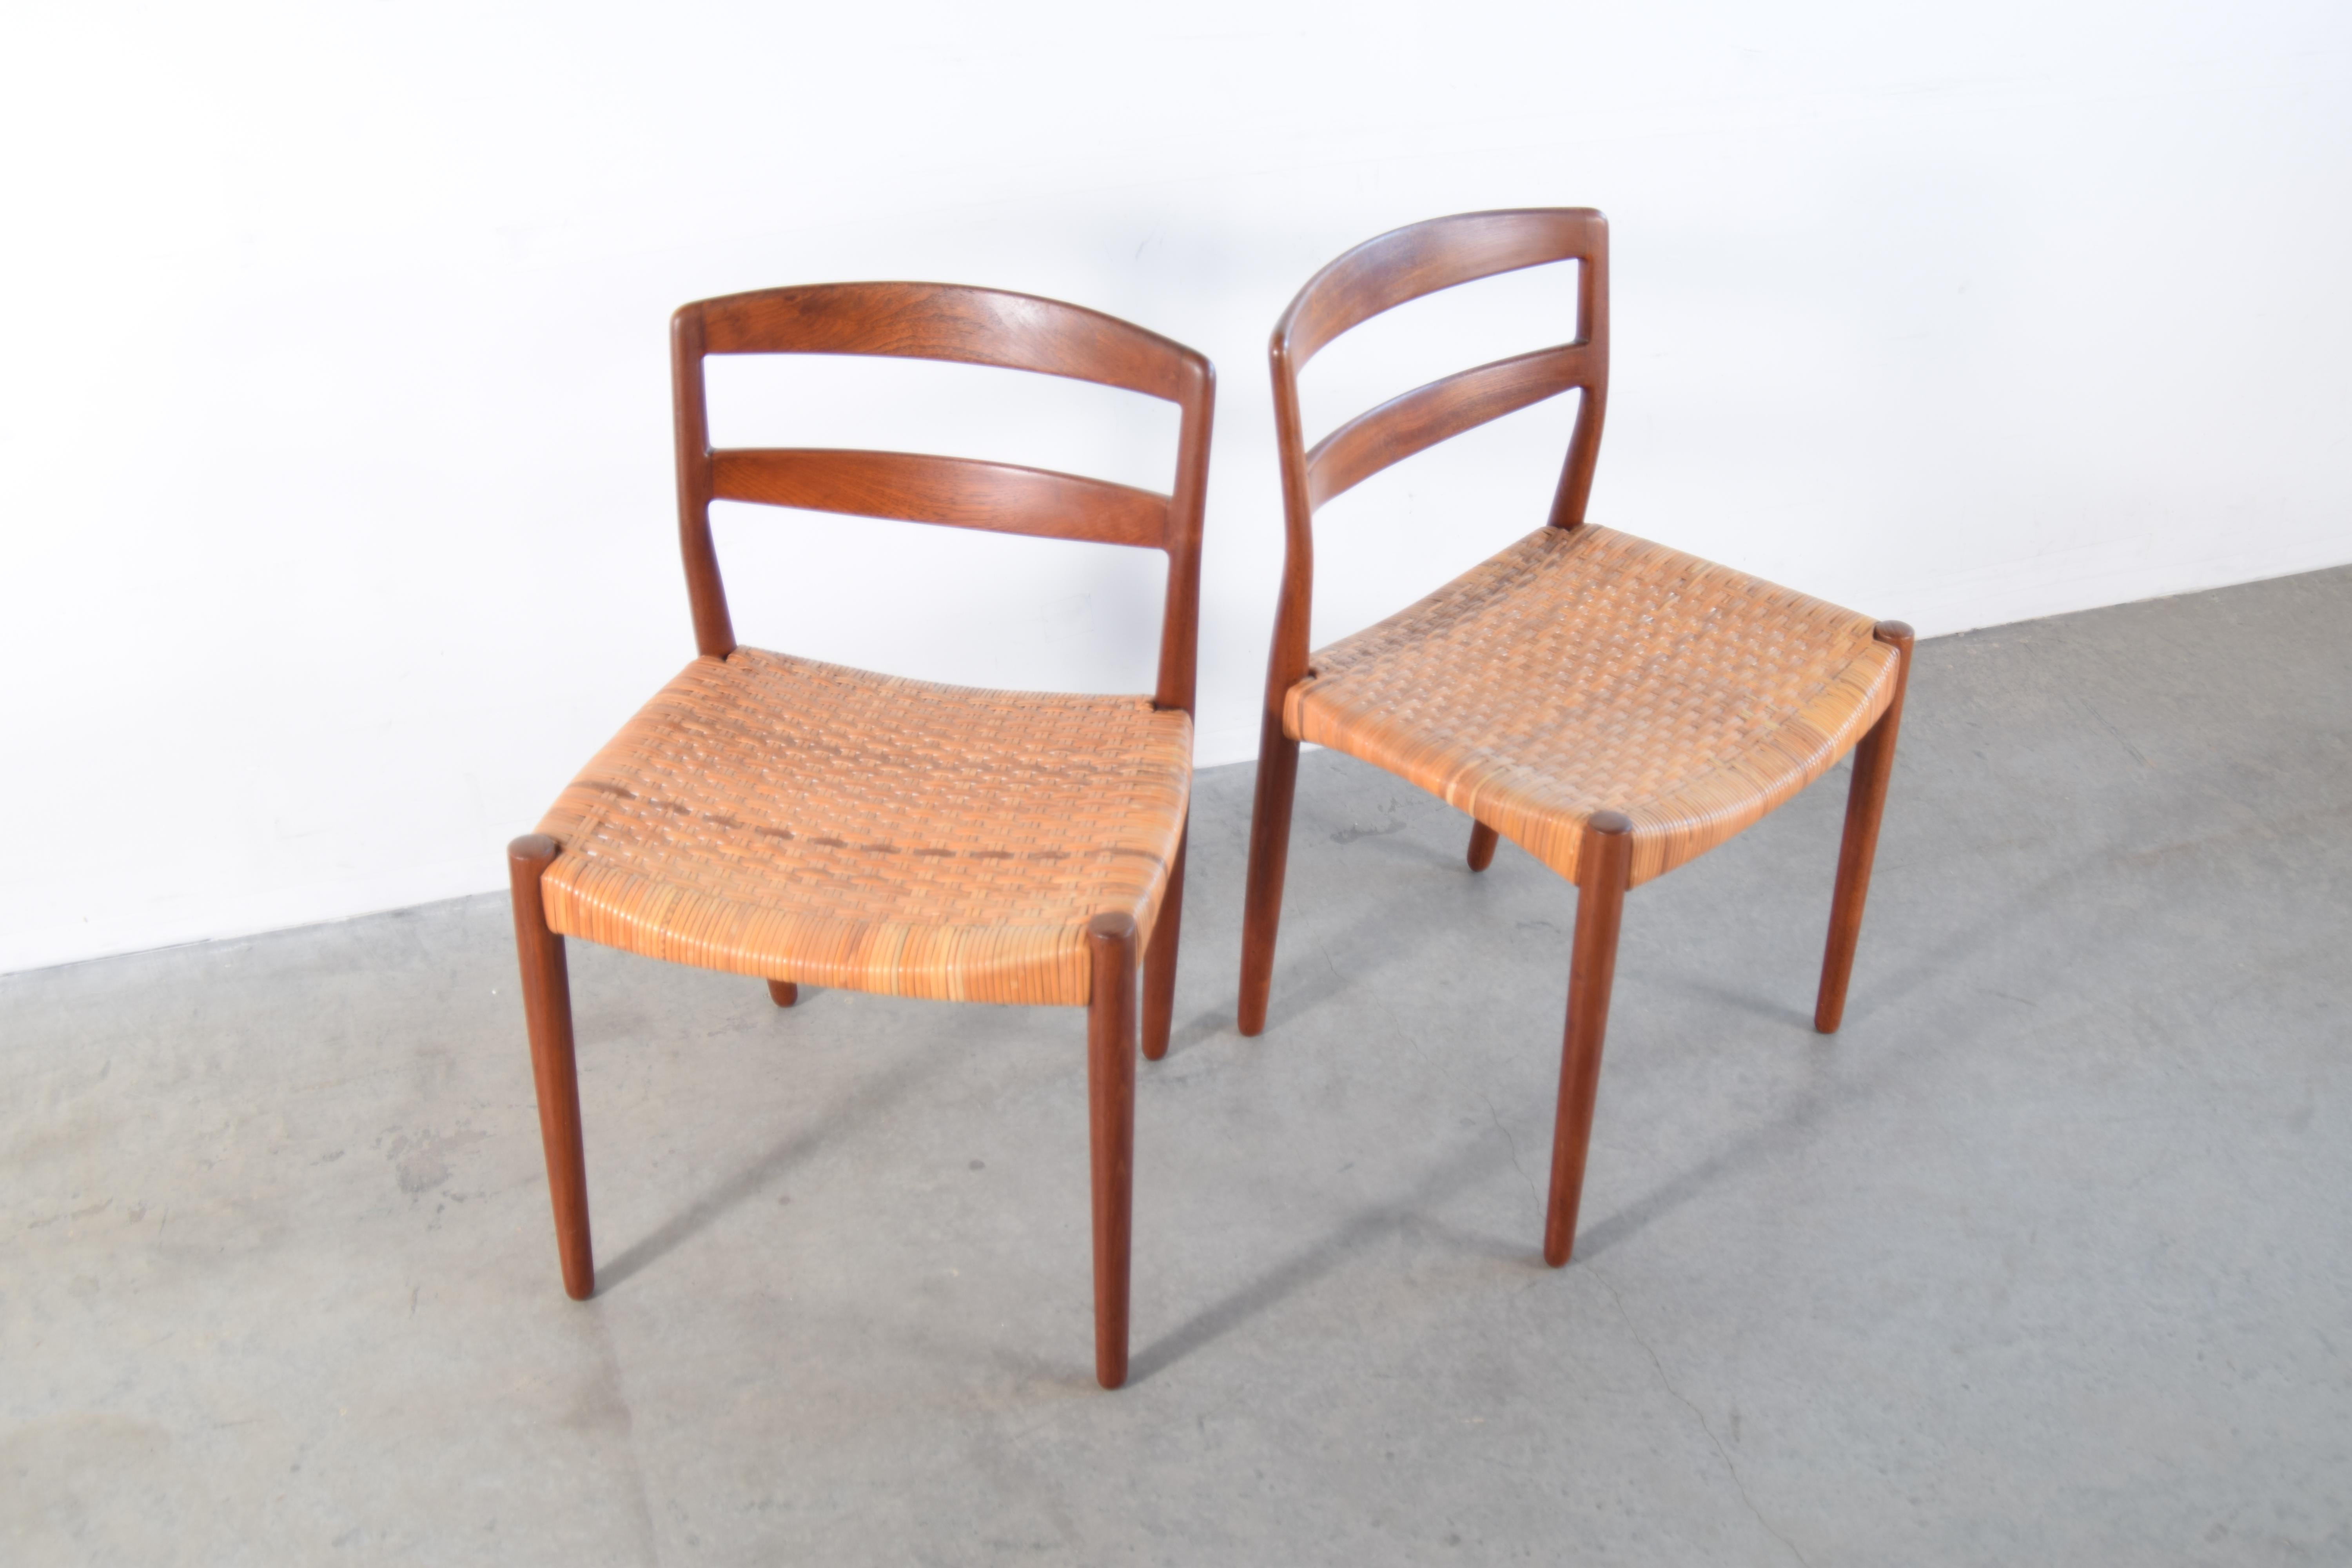 Pair of Ejner Larsen and Aksel Bender Madsen Teak and Cane Chairs For Sale 2